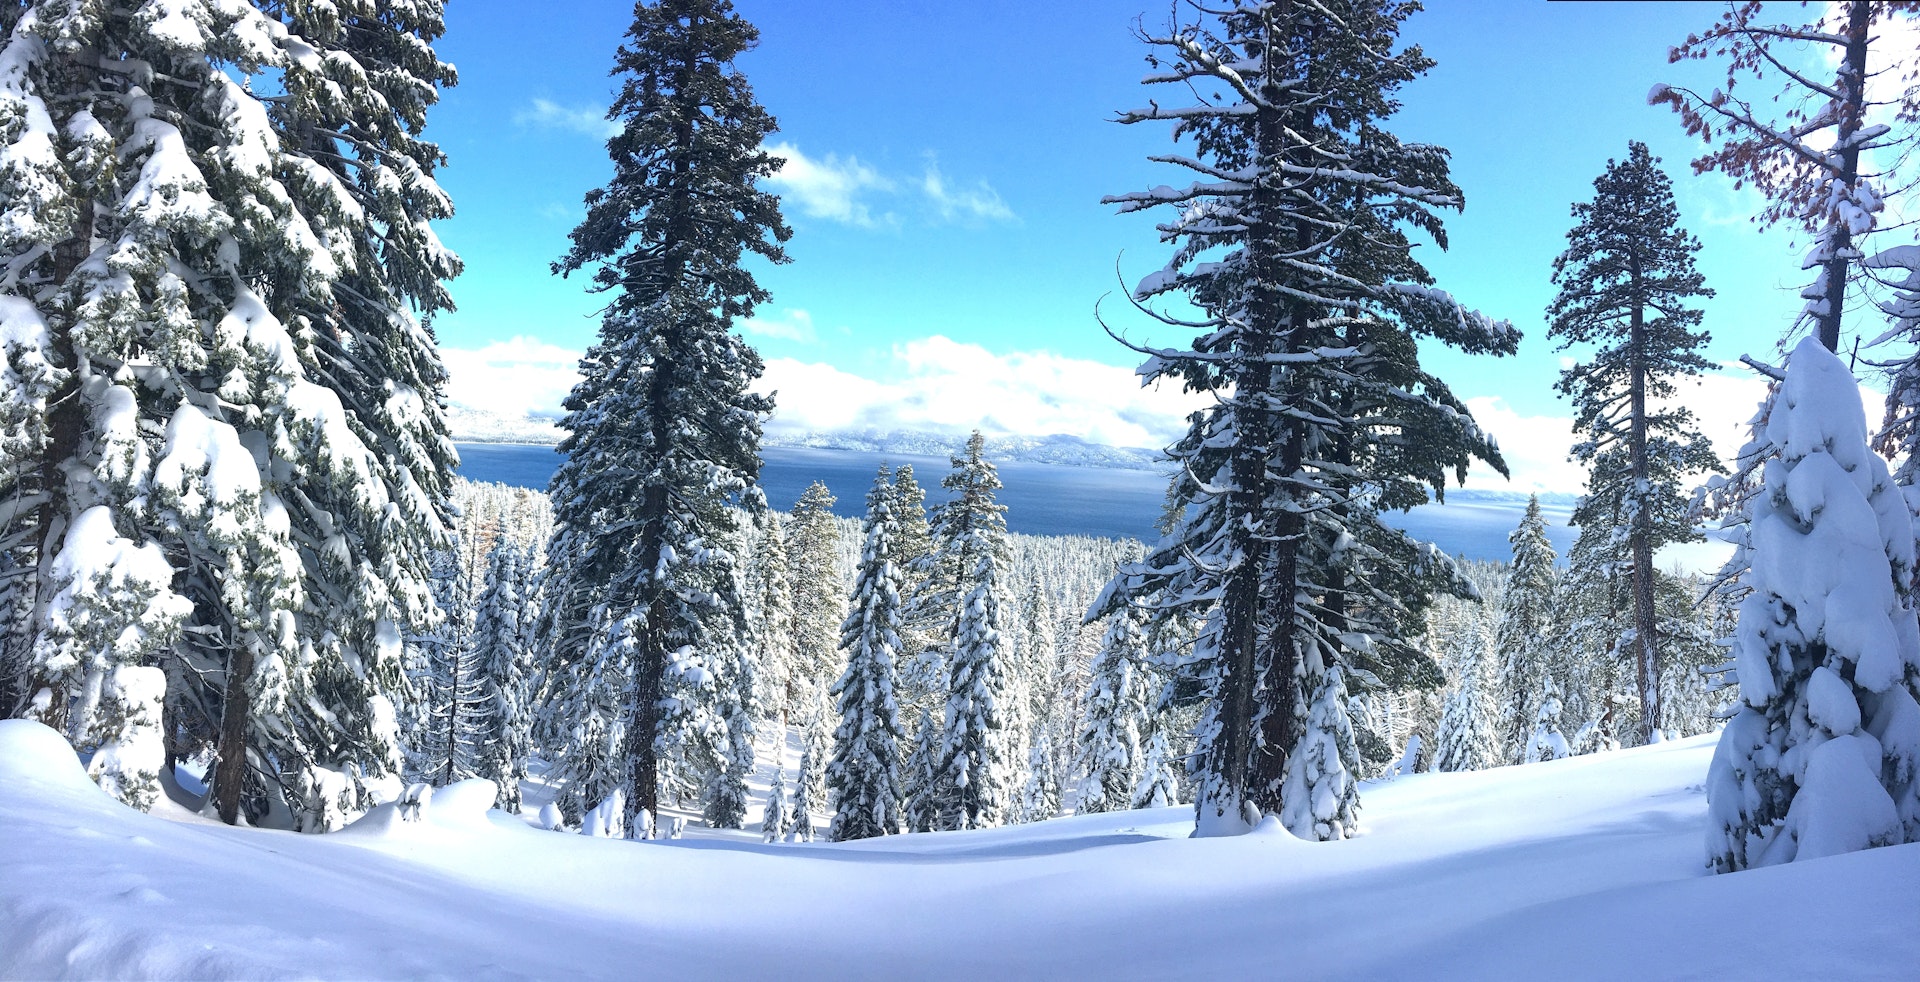 A snow field surrounded by tall evergreens with snowy peaks in the distance